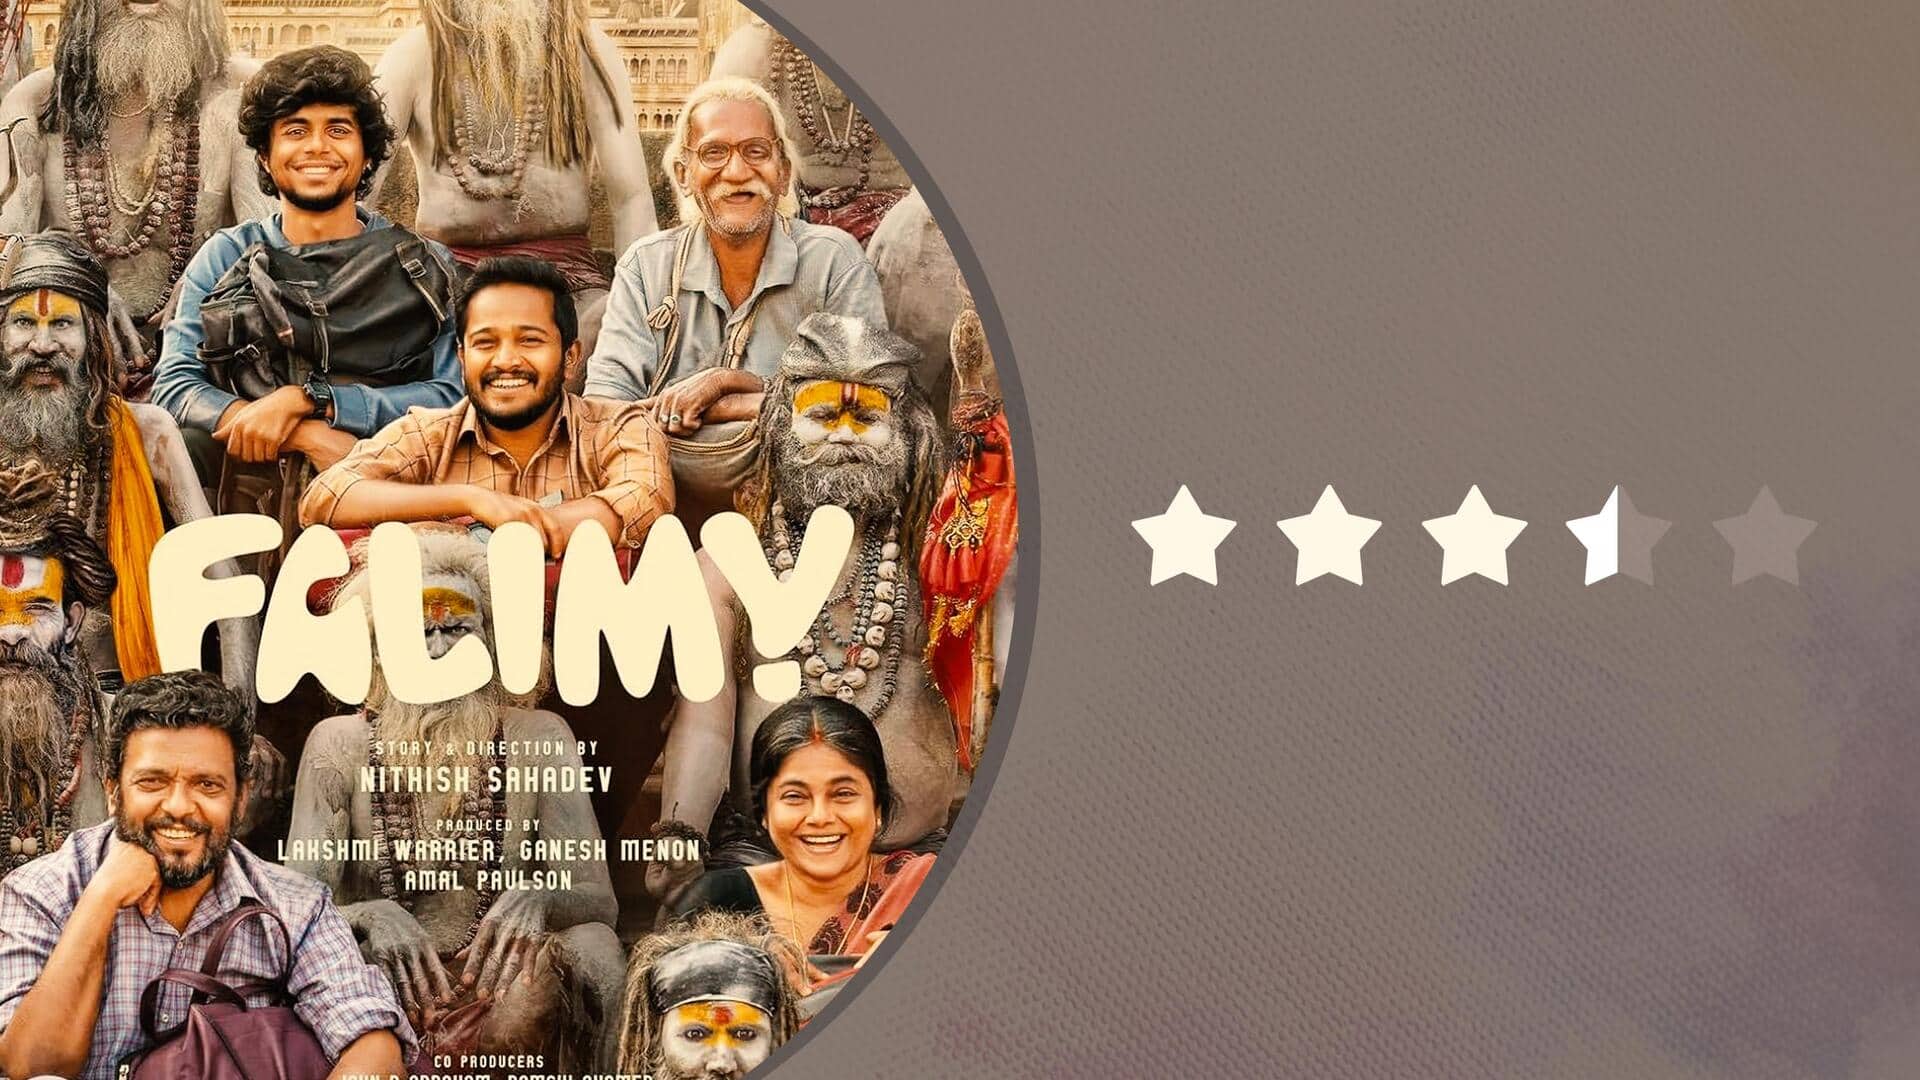 'Falimy' review: Basil Joseph starrer is funny, sentimental, and heartening 